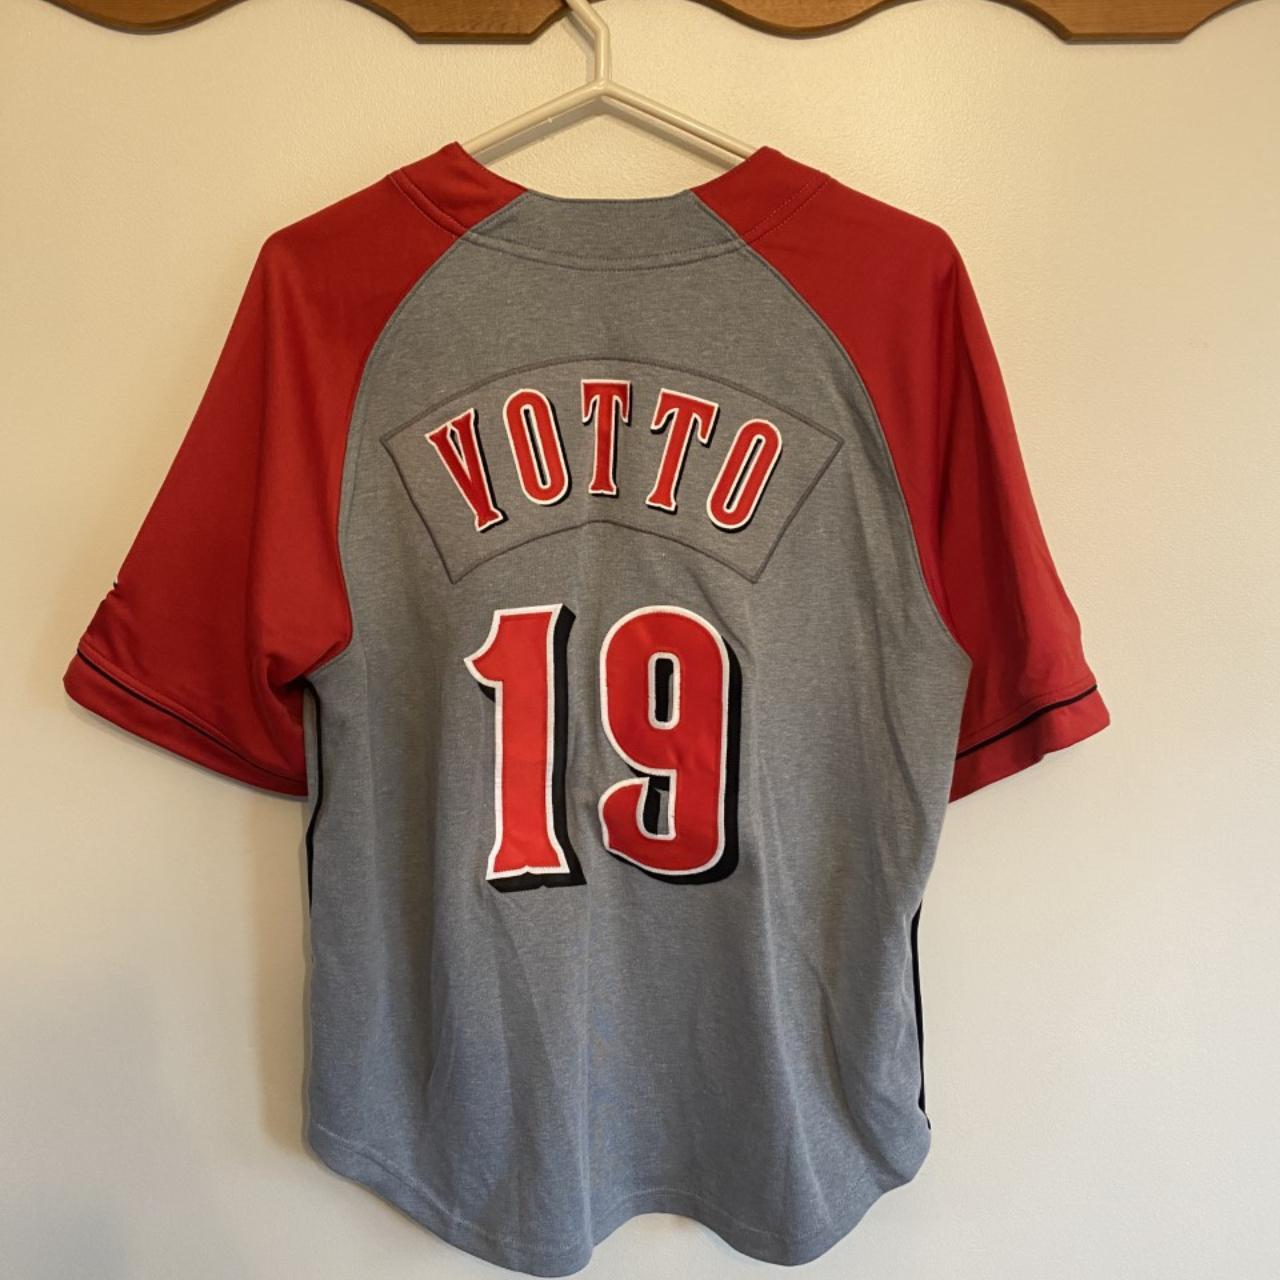 joey votto throwback jersey